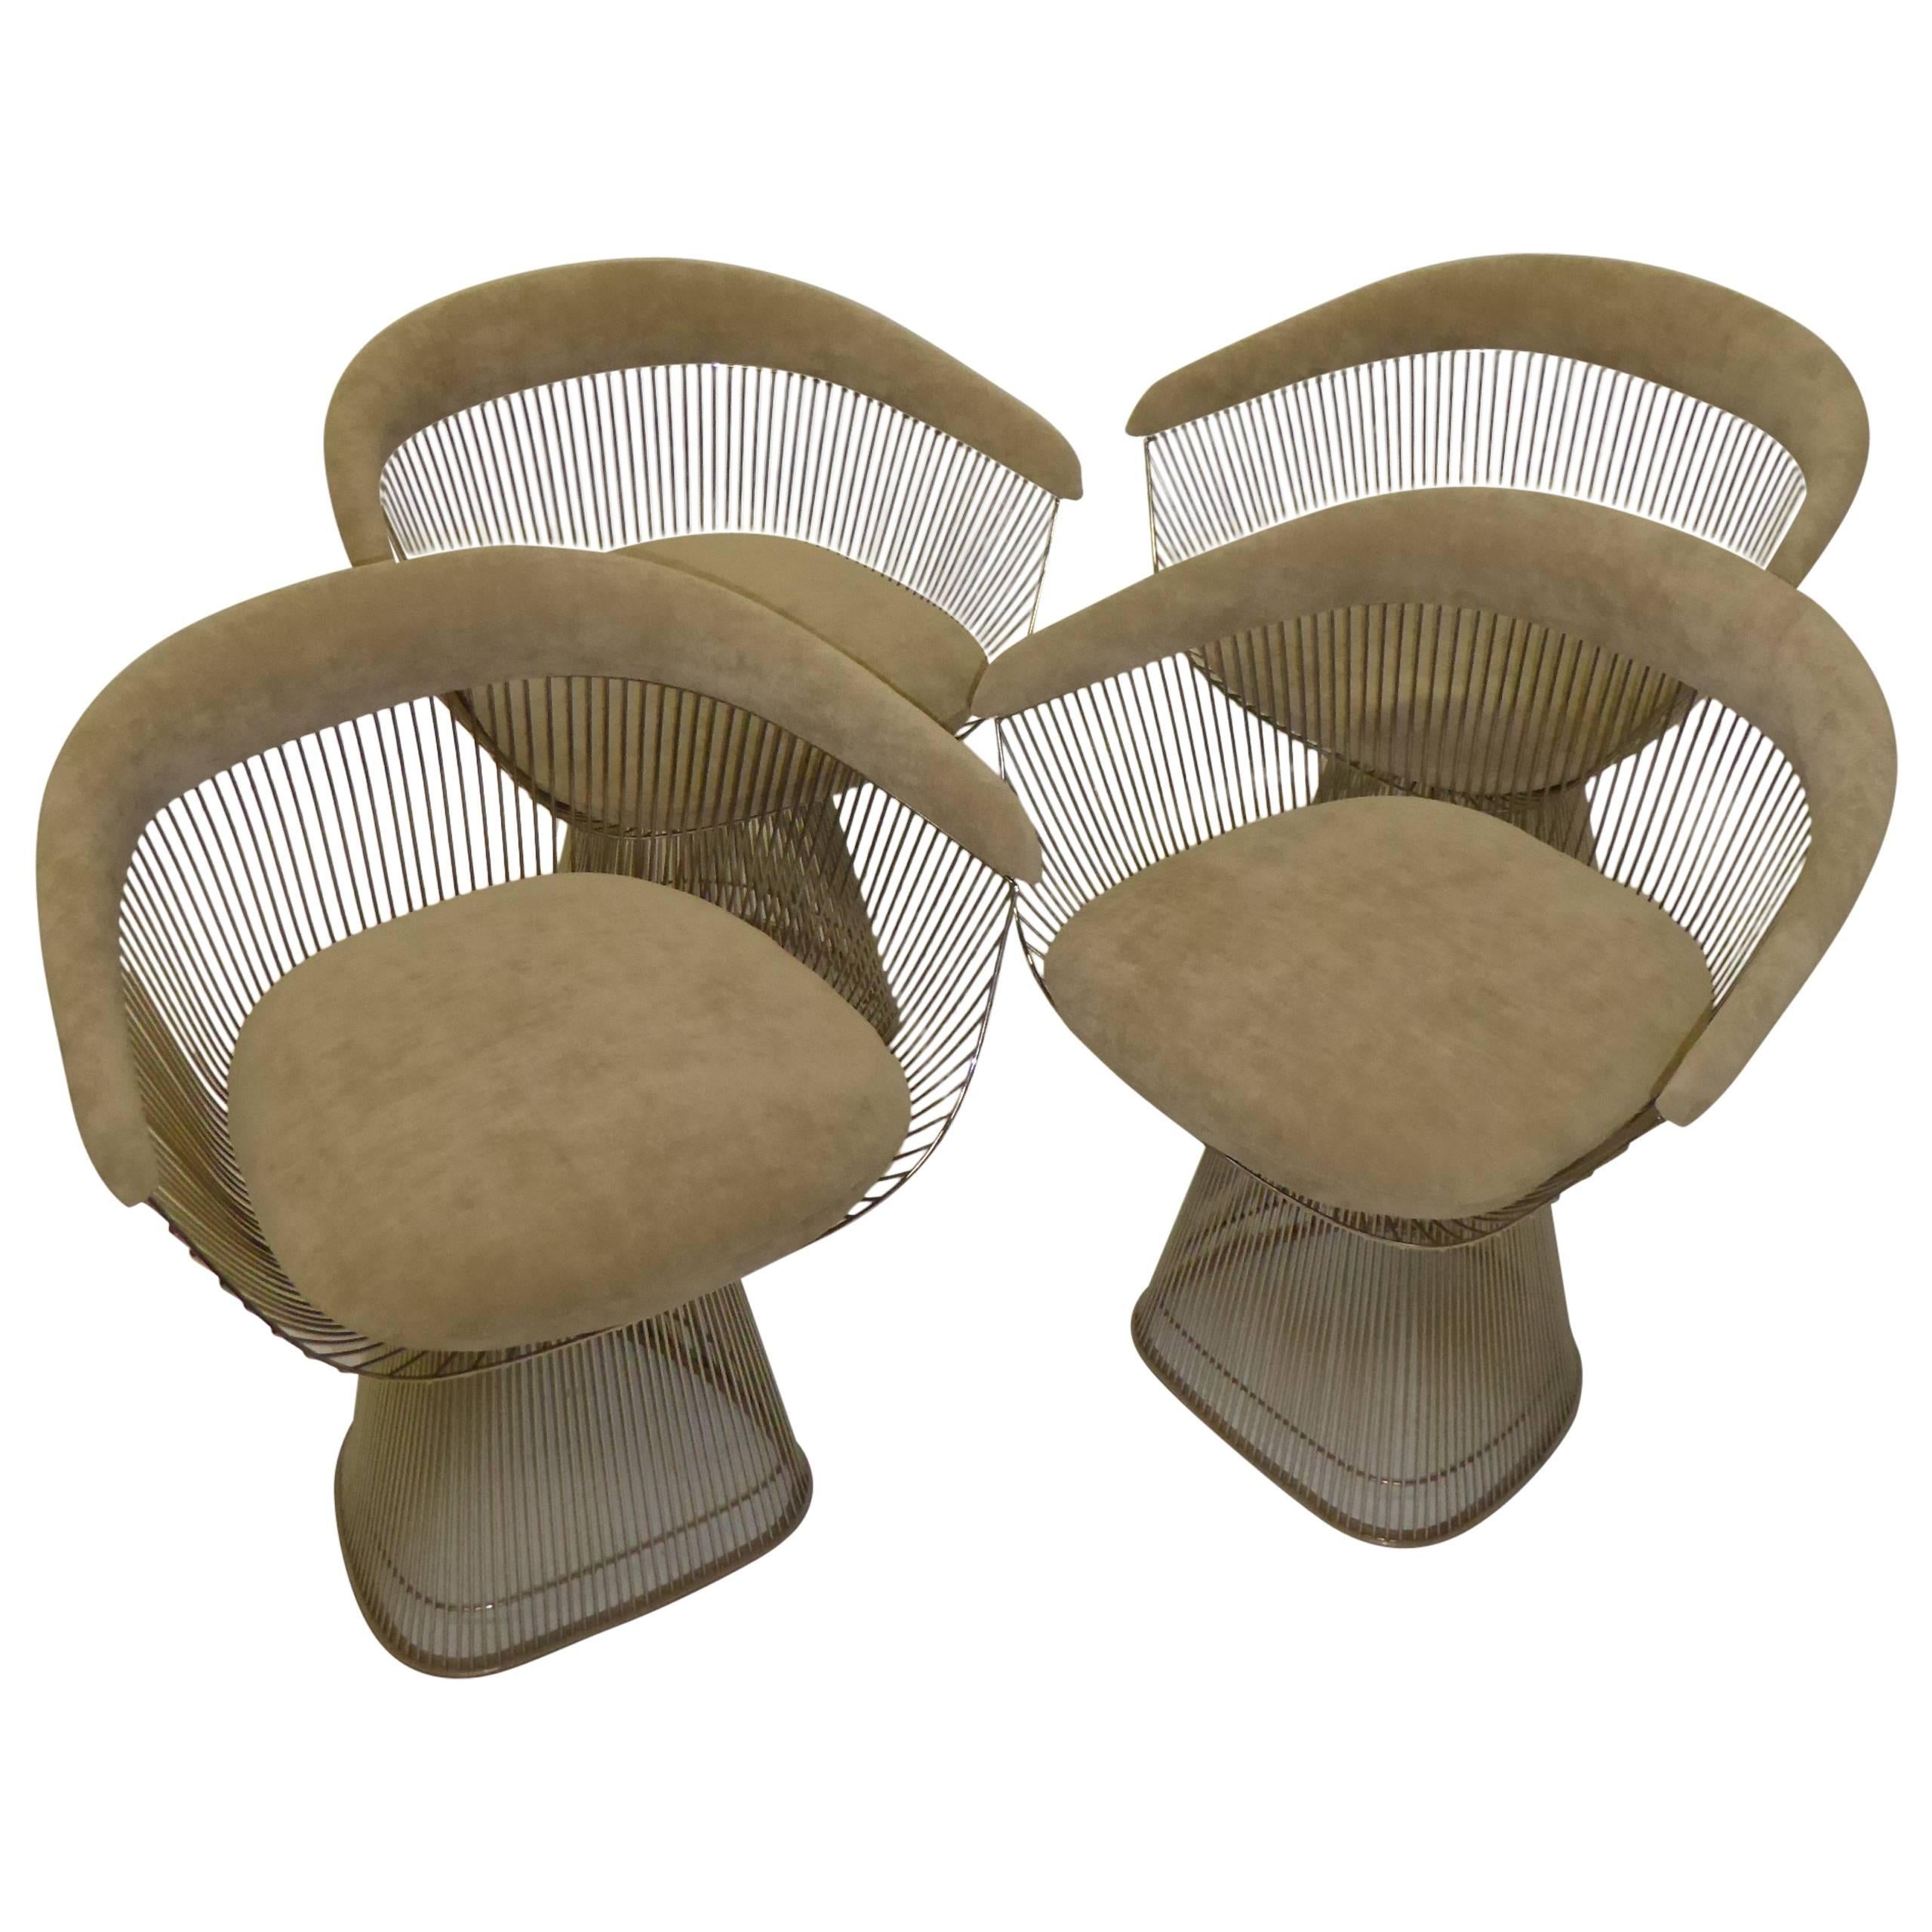 Four Iconic Warren Platner Armchairs for Knoll